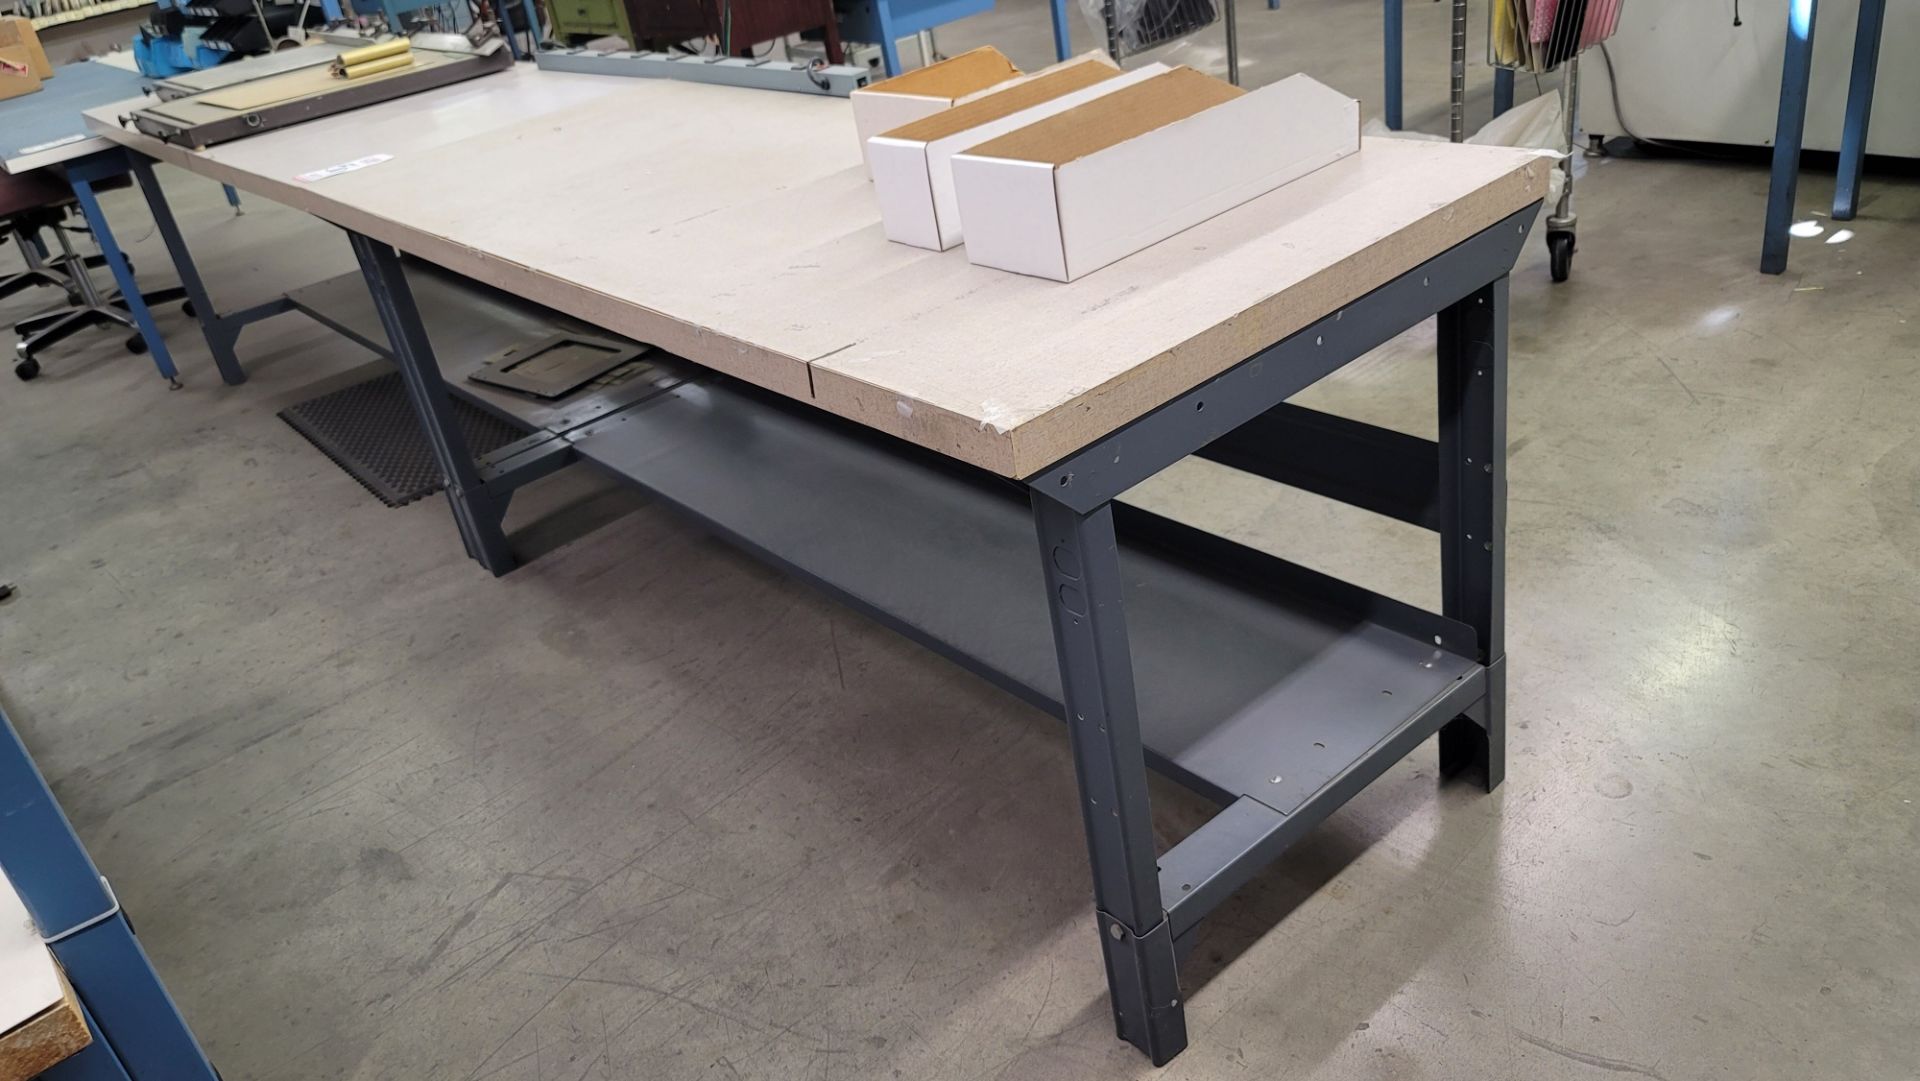 LOT - (2) STEEL TABLES W/ PARTICLE BOARD TOP, EACH TABLE IS 6' X 30" X 31" HT, NO CONTENTS